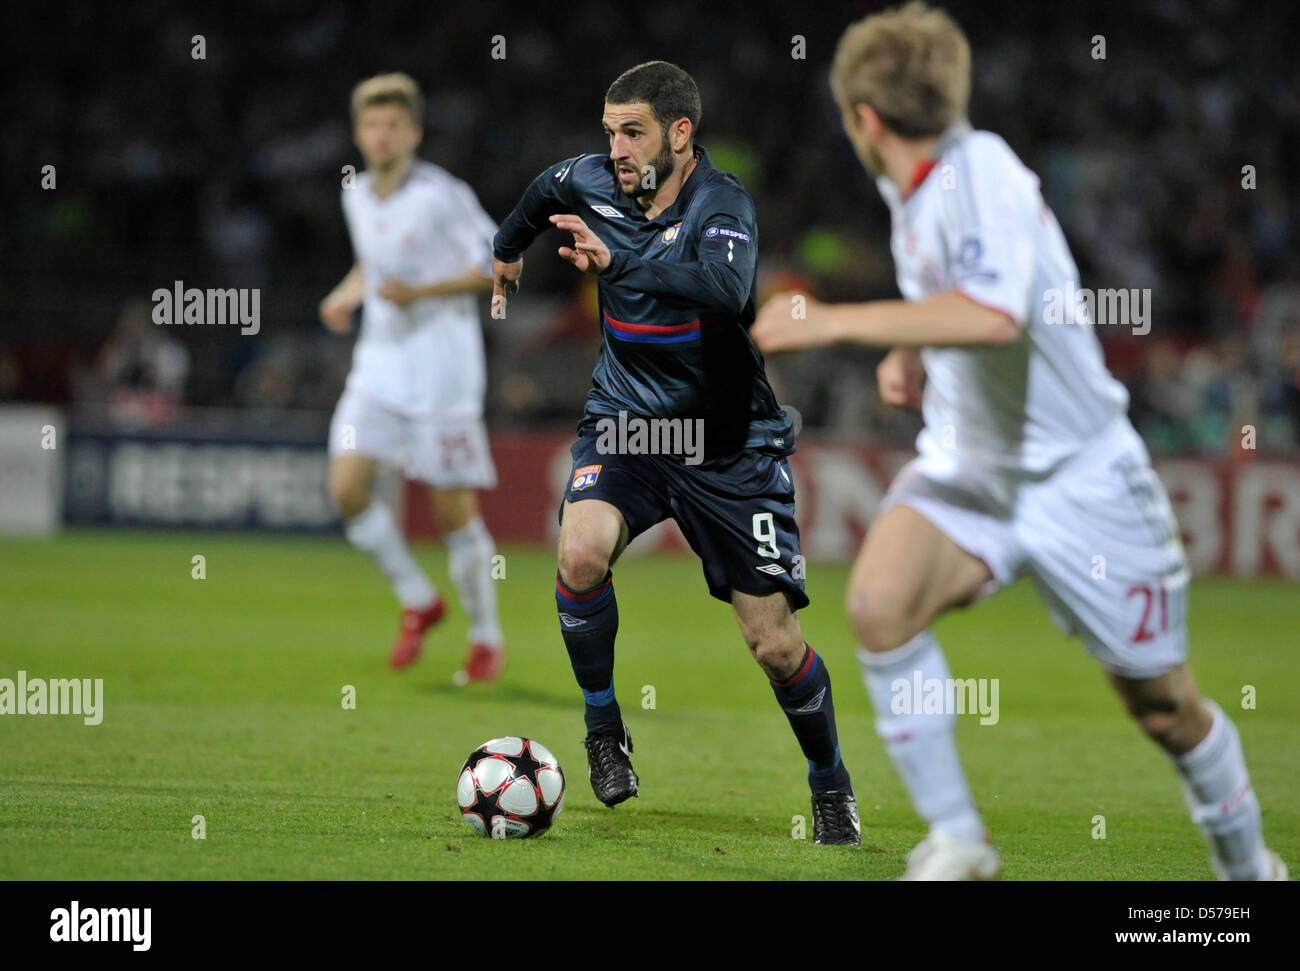 Lyon's Lisandro Lopez shown in action during the UEFA Champions League  semi-final second leg match Olympique Lyonnais vs FC Bayern Munich at Stade  de Gerland in Lyon, France, 27 April 2010. After